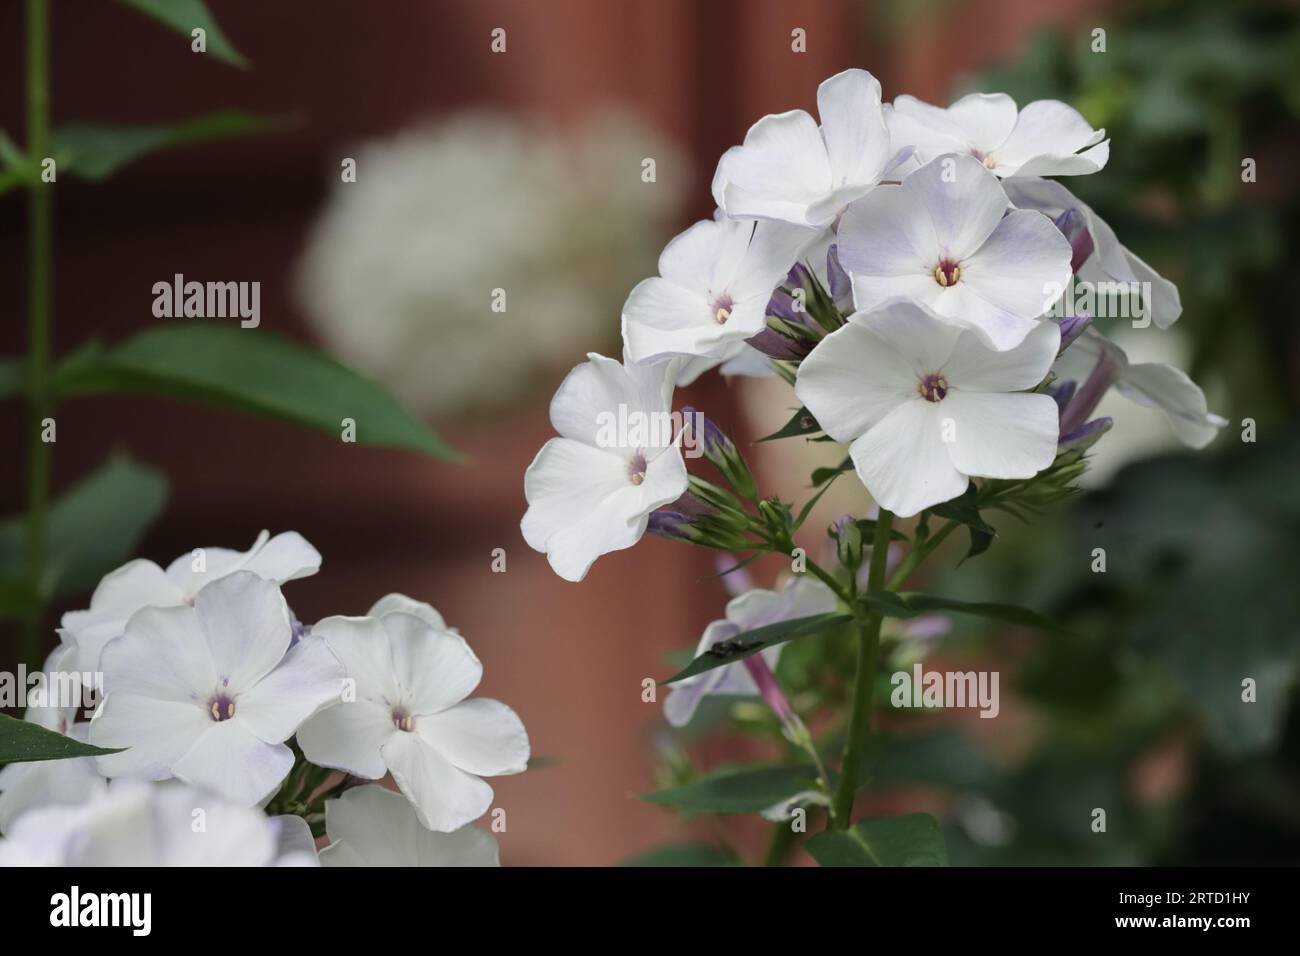 Close-up of white phlox panniculata flowers in a garden bed Stock Photo